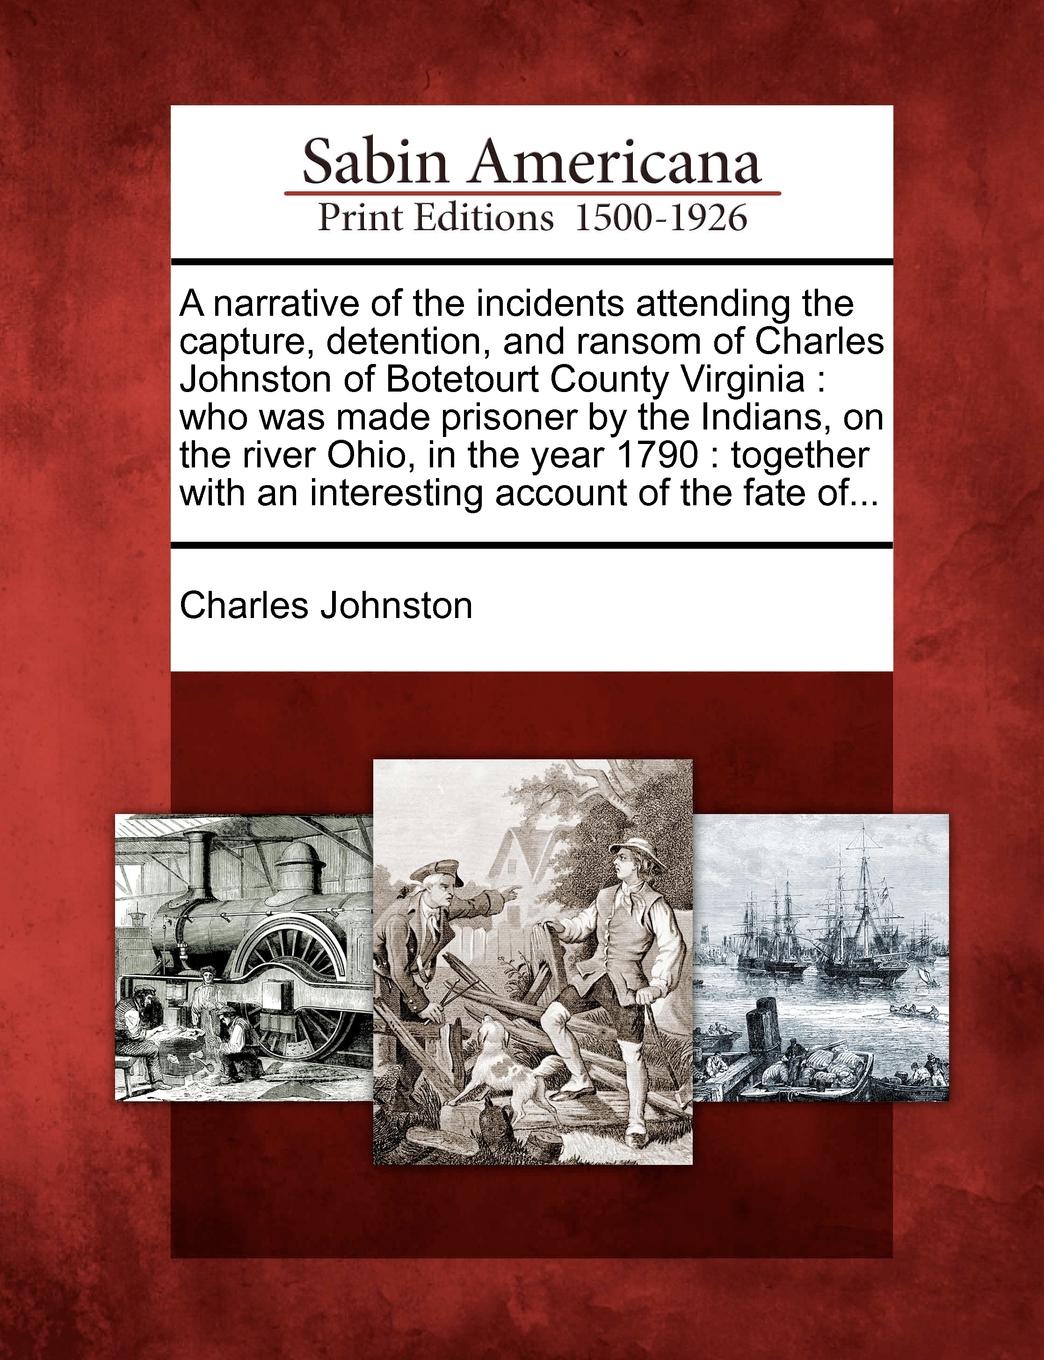 A narrative of the incidents attending the capture, detention, and ransom of Charles Johnston of Botetourt County Virginia. who was made prisoner by the Indians, on the river Ohio, in the year 1790 : together with an interesting account of the fat...